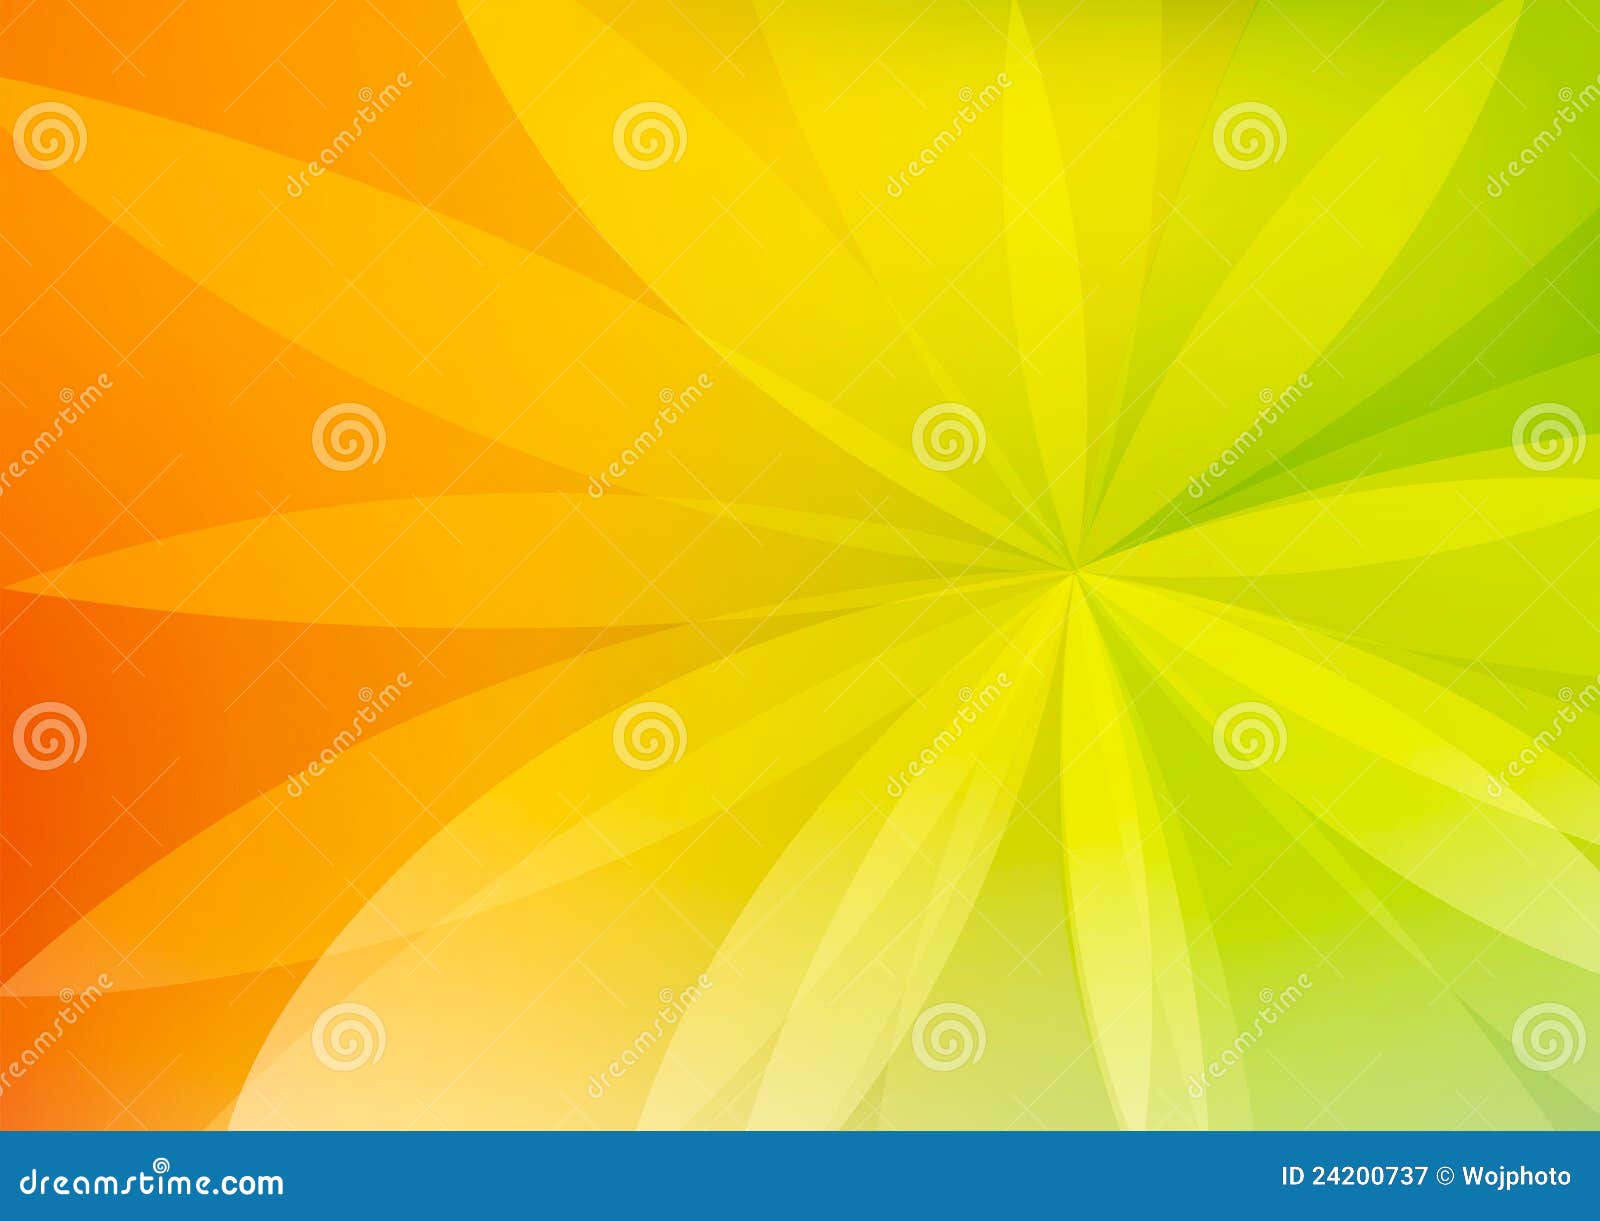 Abstract Green And Orange Background Wallpaper Stock Illustration